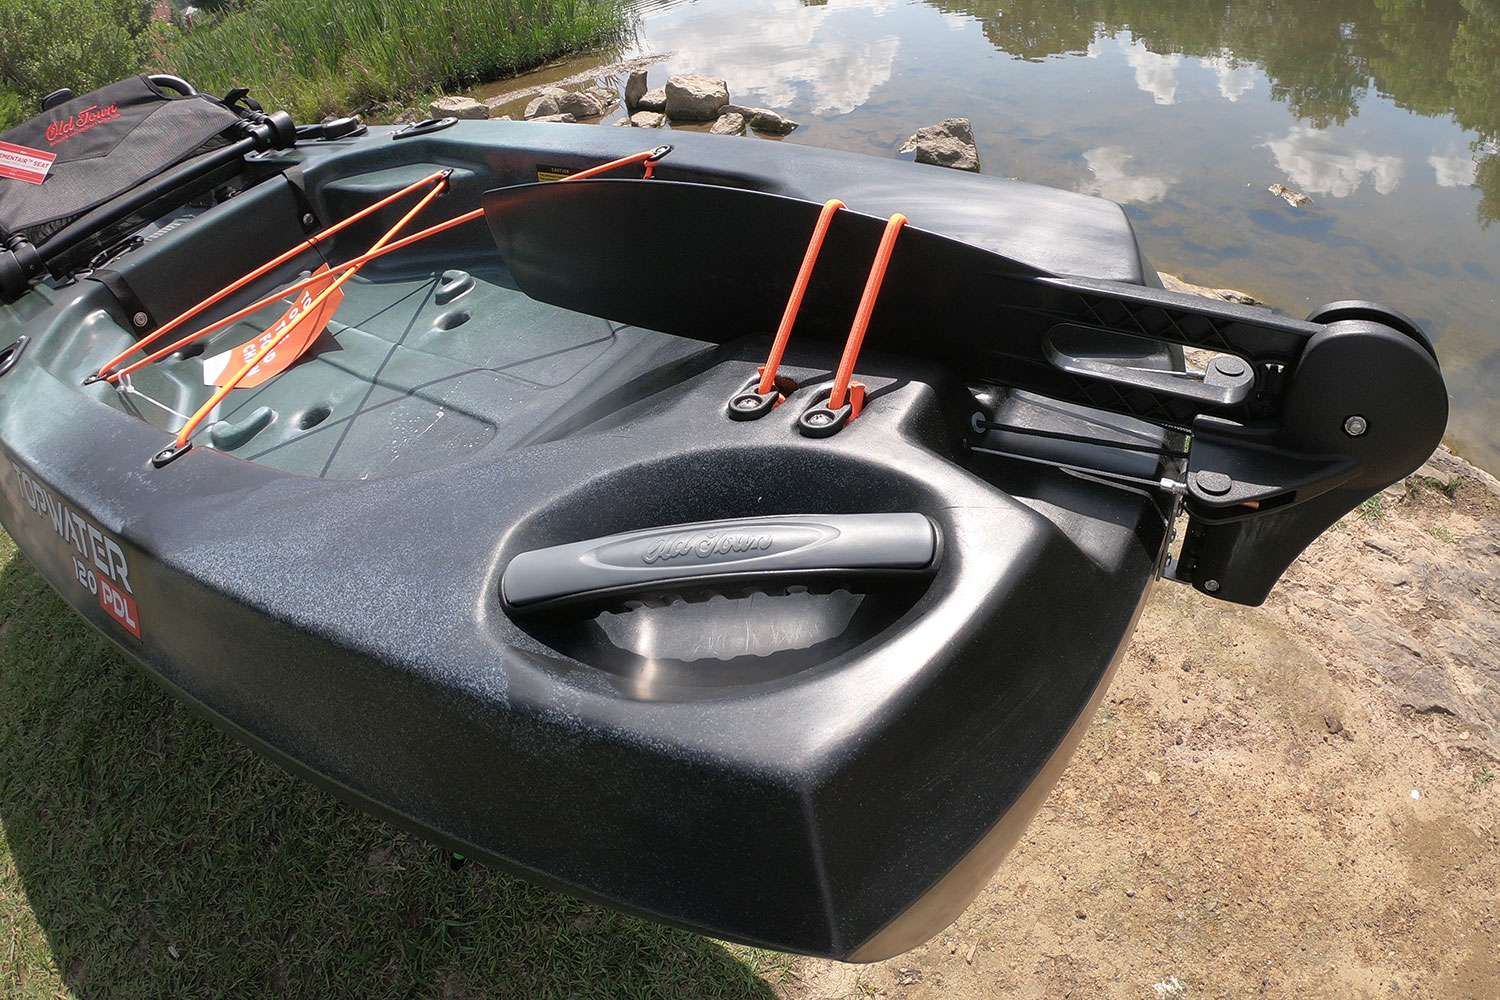 There are handles all over the place. Here's a convenient handle on the rear of the boat that helps in launching and landing the kayak.  